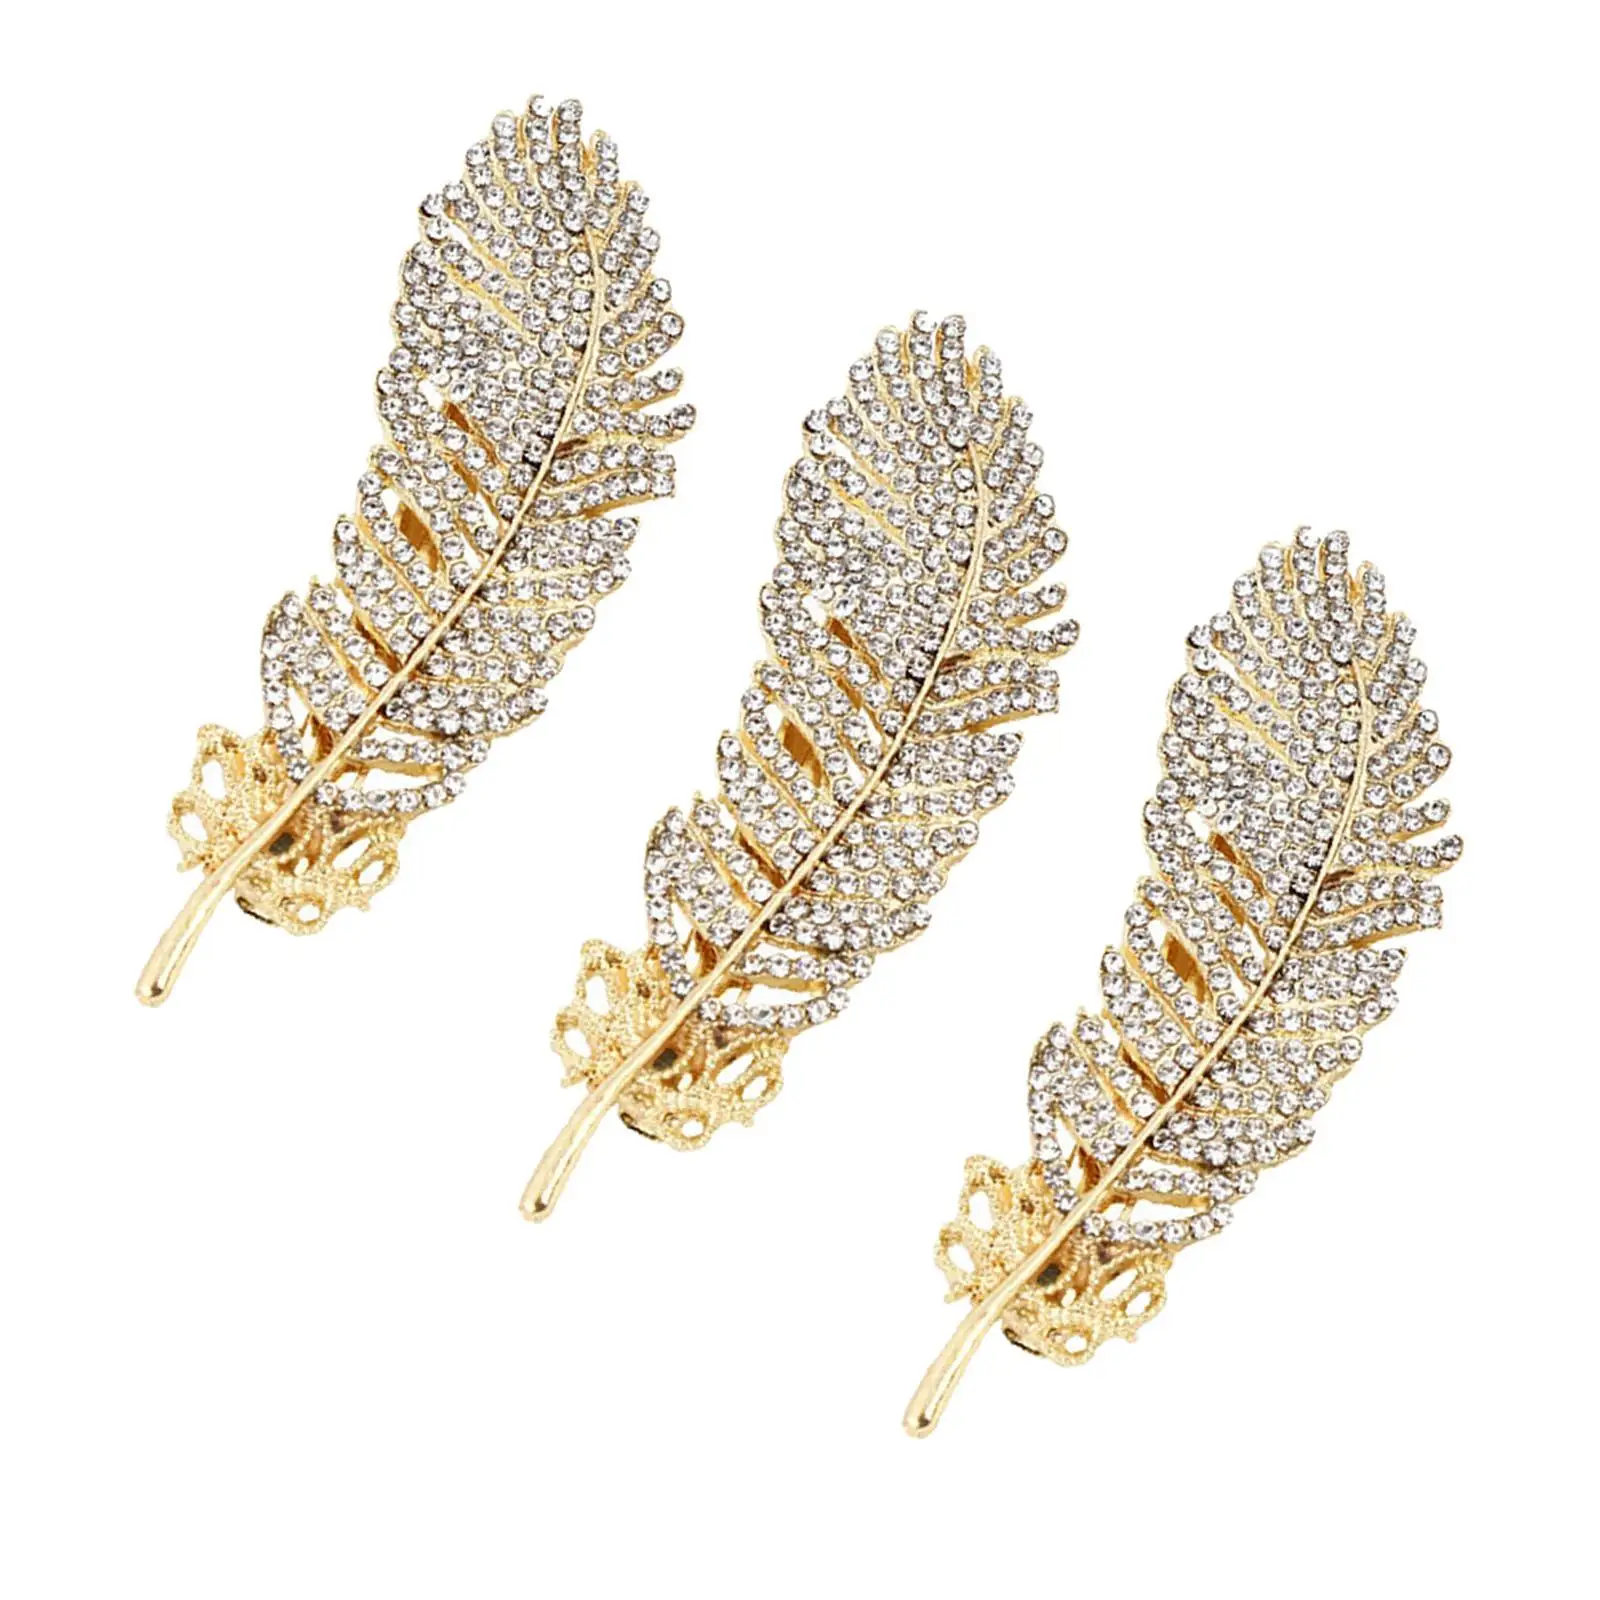 3 Pieces Luxury Hair Clips Metal Sparkling Hairpin Headdress jewelry for party Wedding gifts